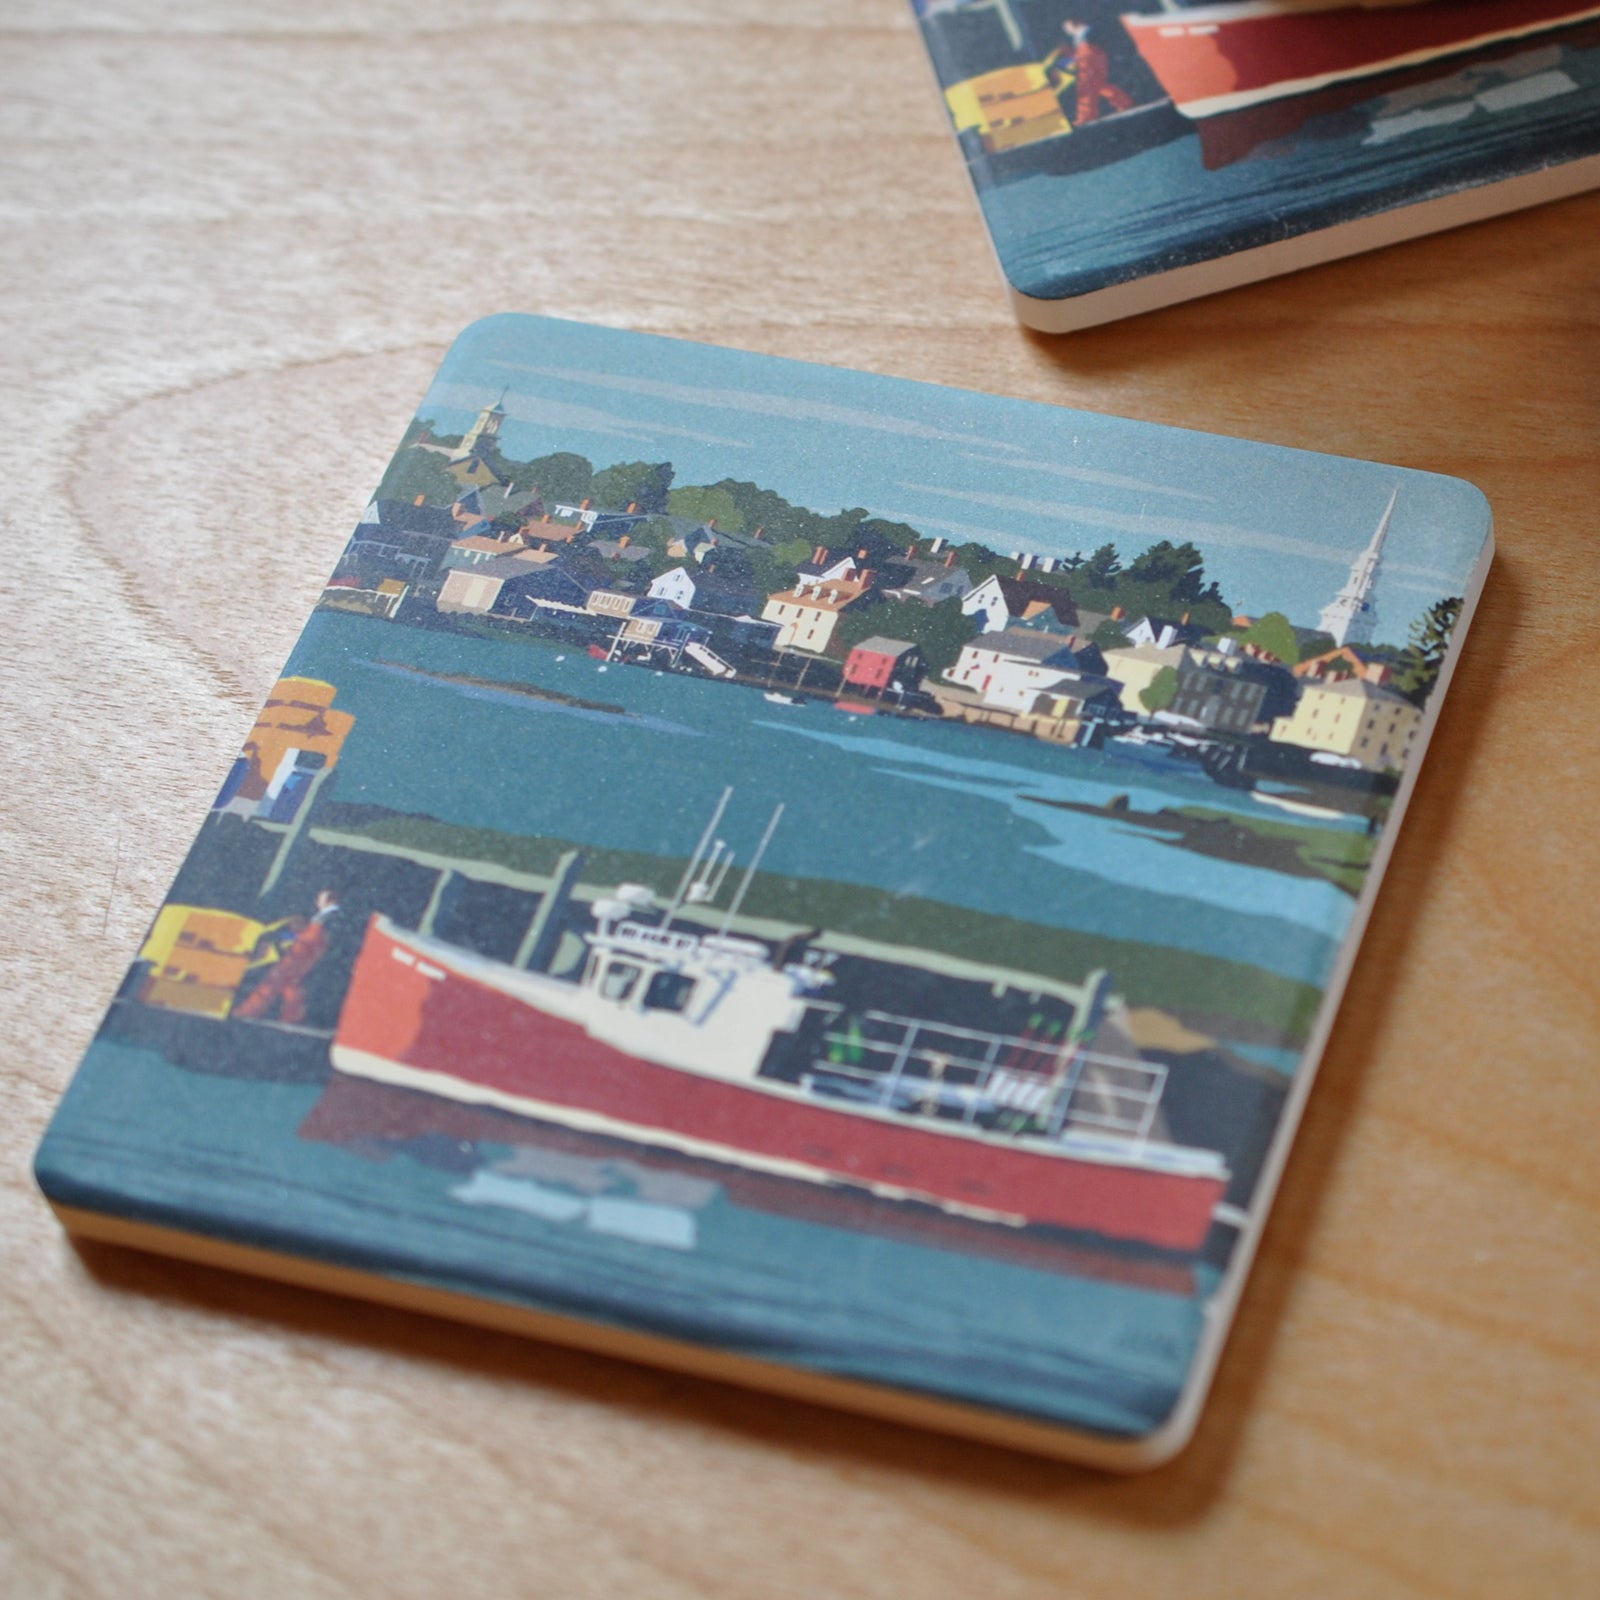 Red Lobster Boat Art Drink Coaster - New Hampshire